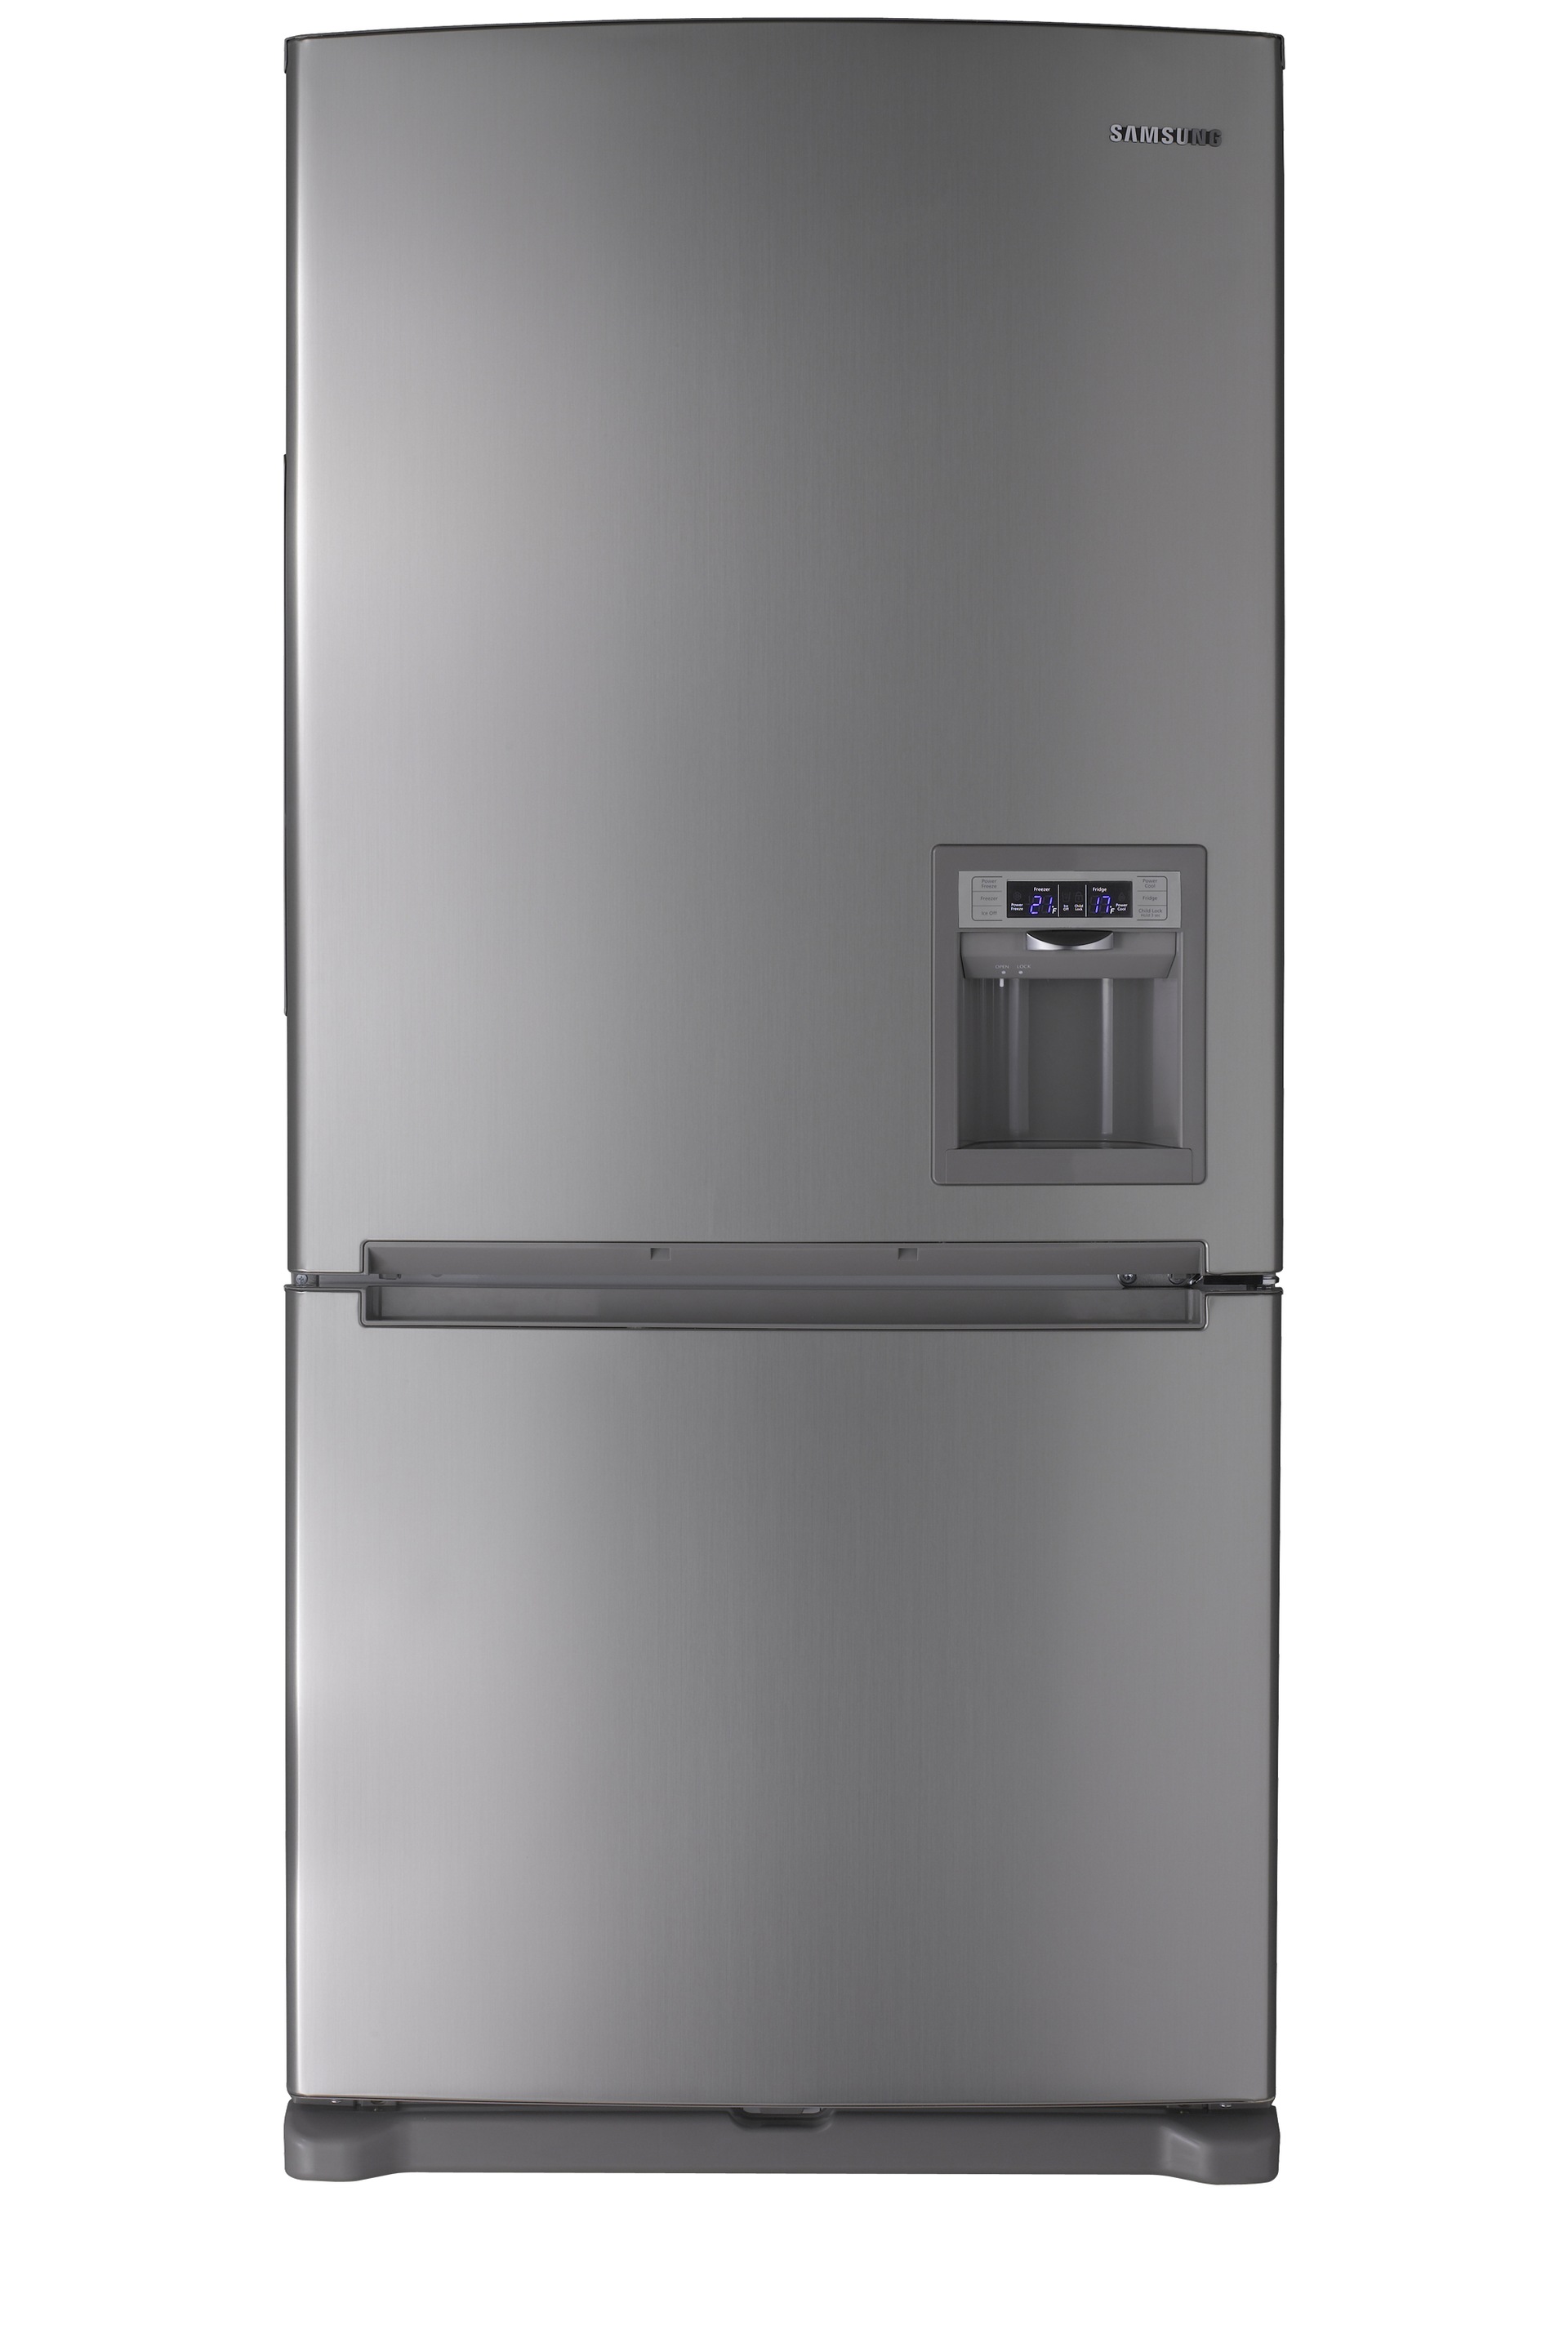 Widest

storage space freezer with twin cooling in its class